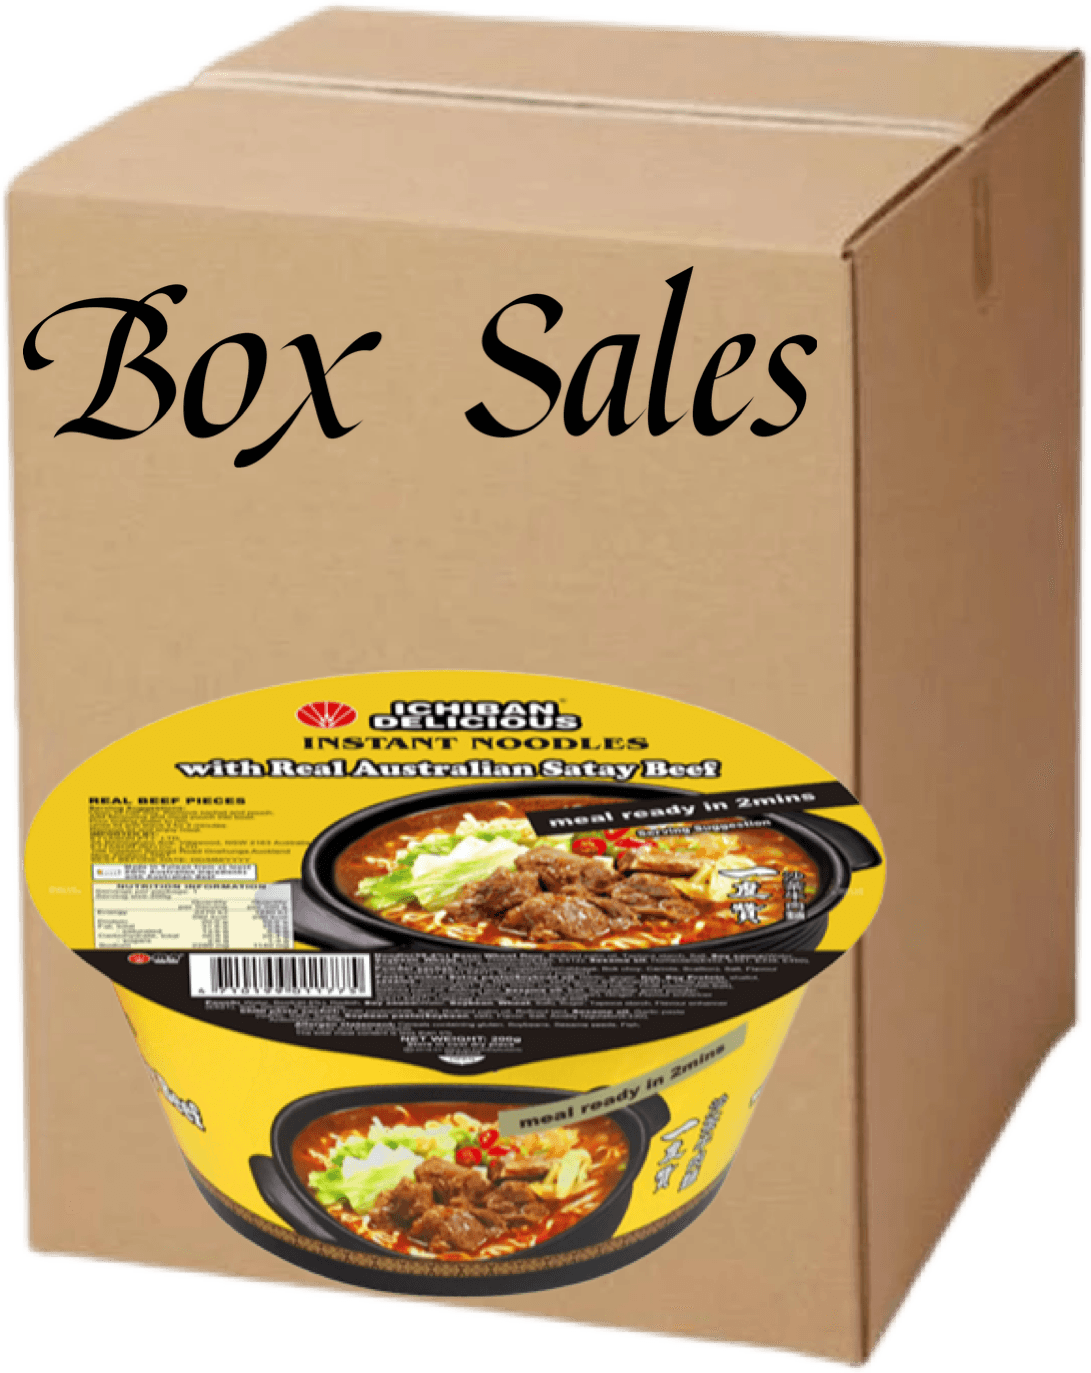 ICHIBAN DELICIOUS INSTANT NOODLE WITH REAL AUSTRALIAN SATAY BEEF BOX SALE 6*200 G - Premium Co  Groceries 